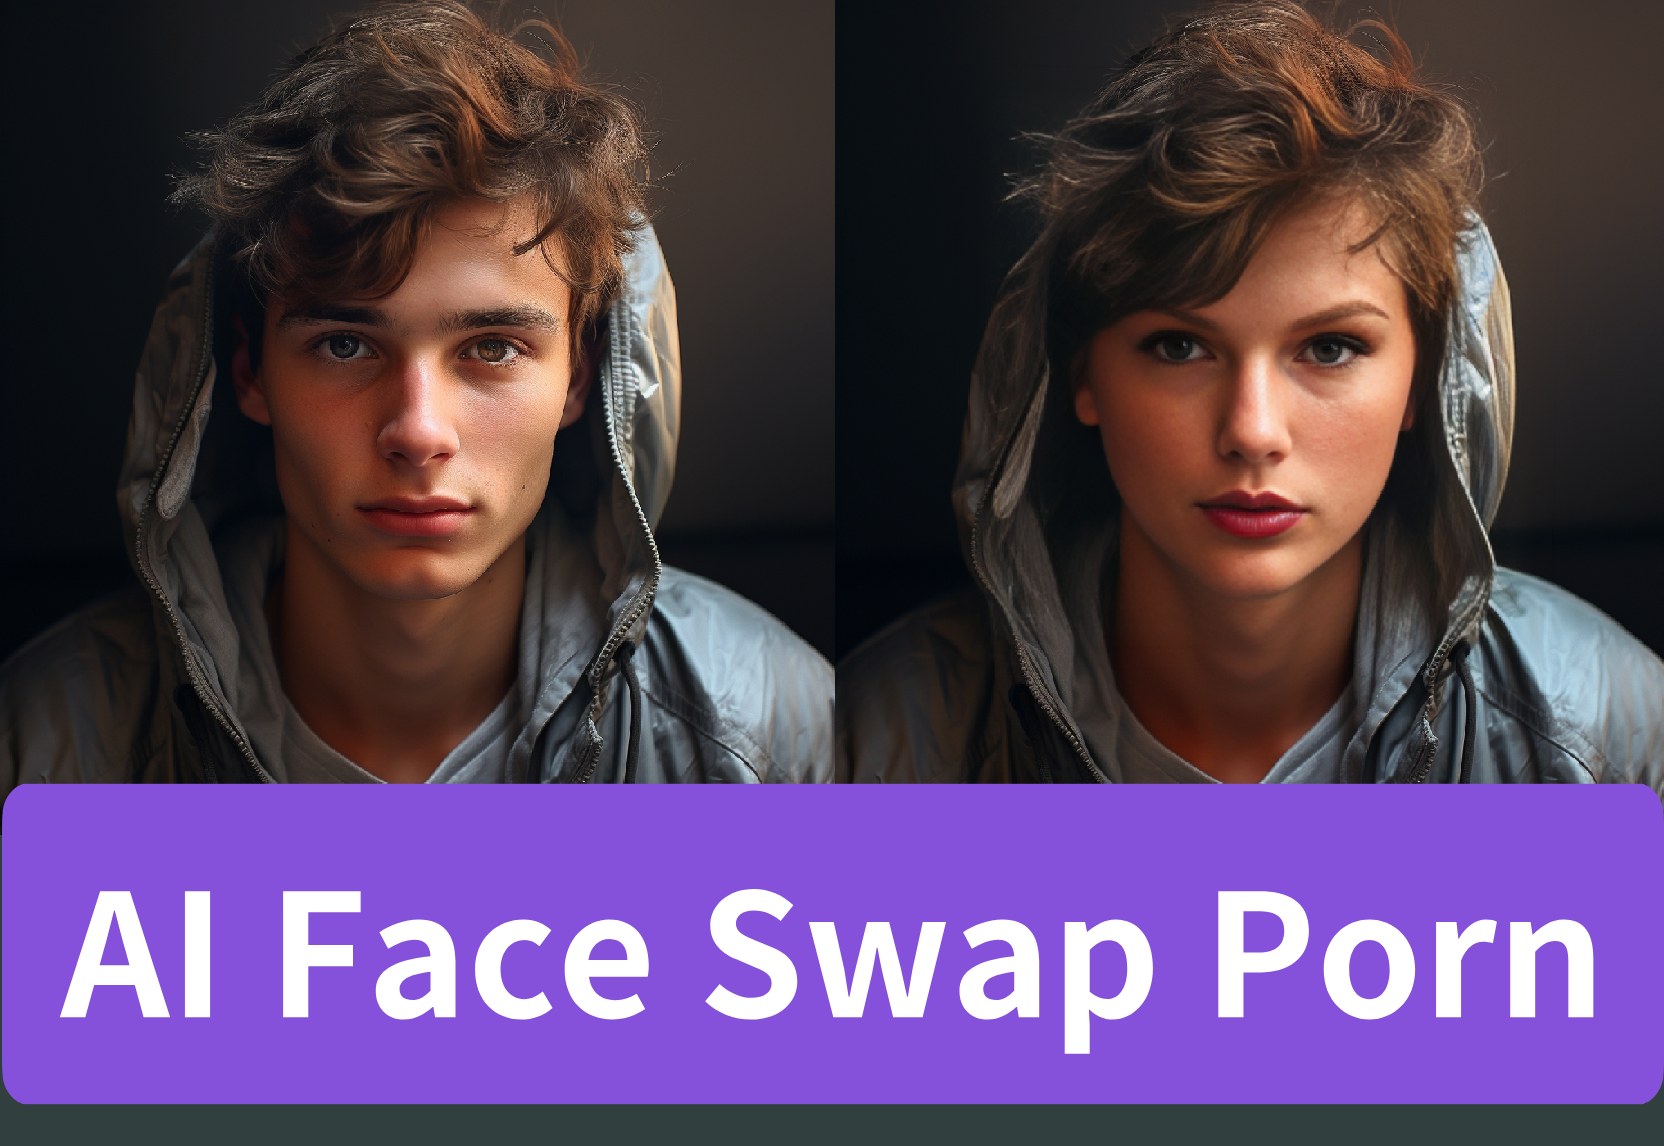 AI Face Swap Tool: The Ultimate Guide to Adult Content